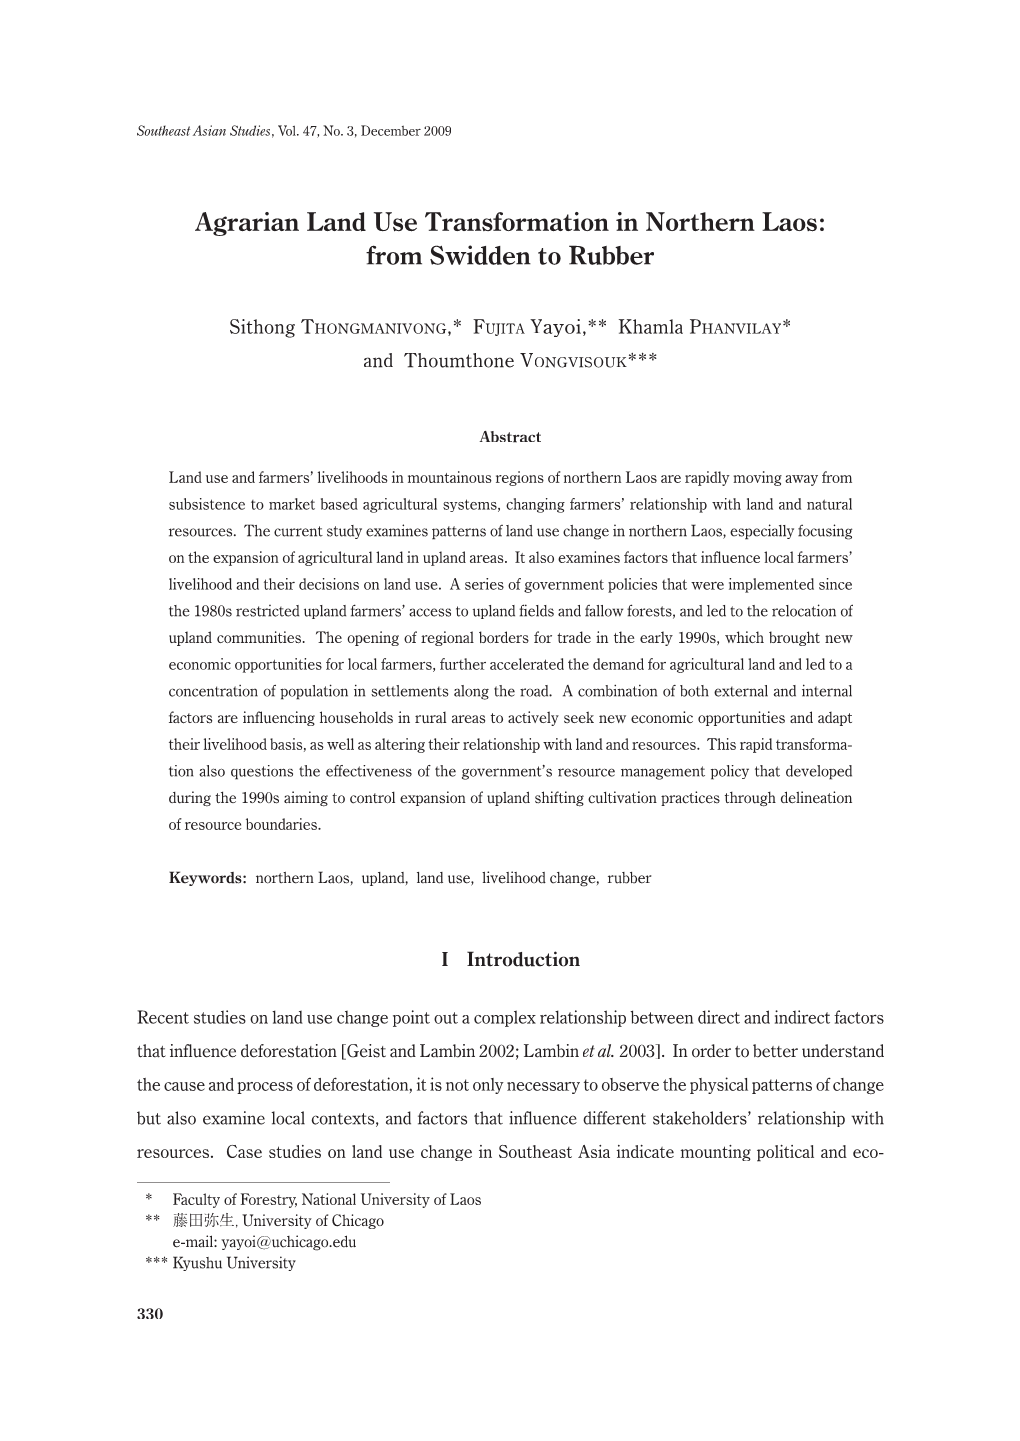 Agrarian Land Use Transformation in Northern Laos: from Swidden to Rubber